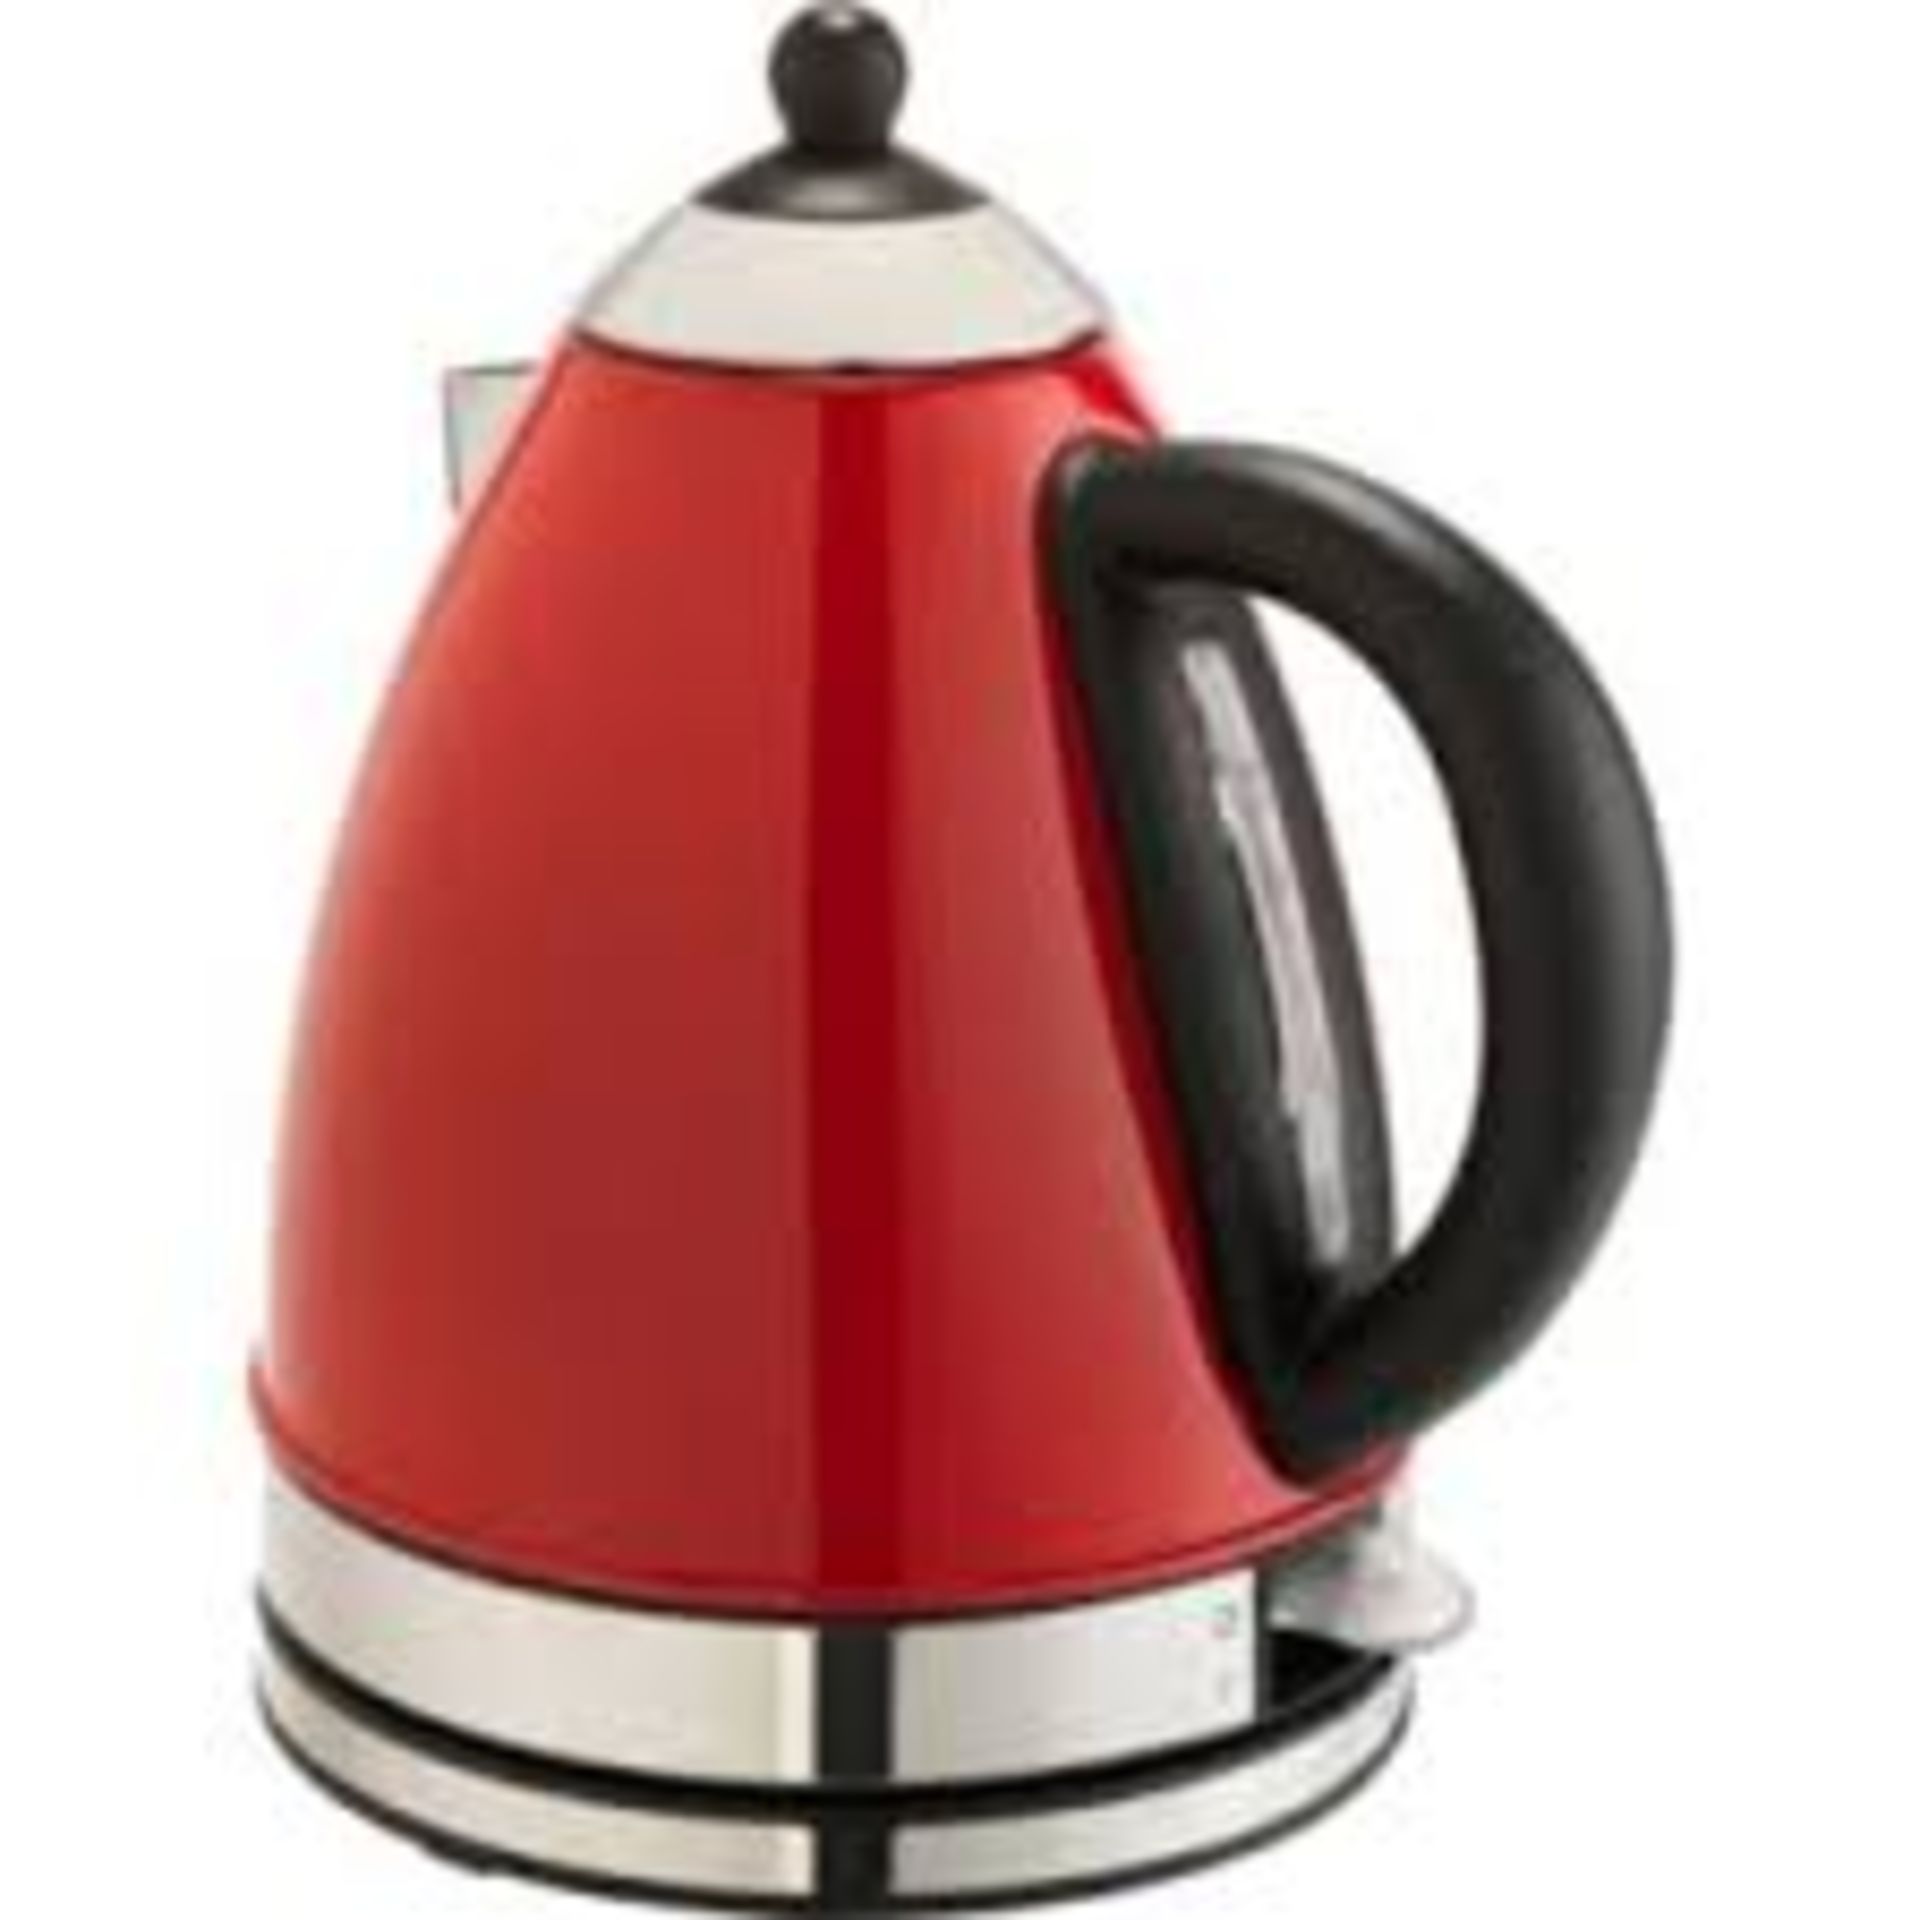 COLOUR MATCH SS POPPY RED JUG KETTLE